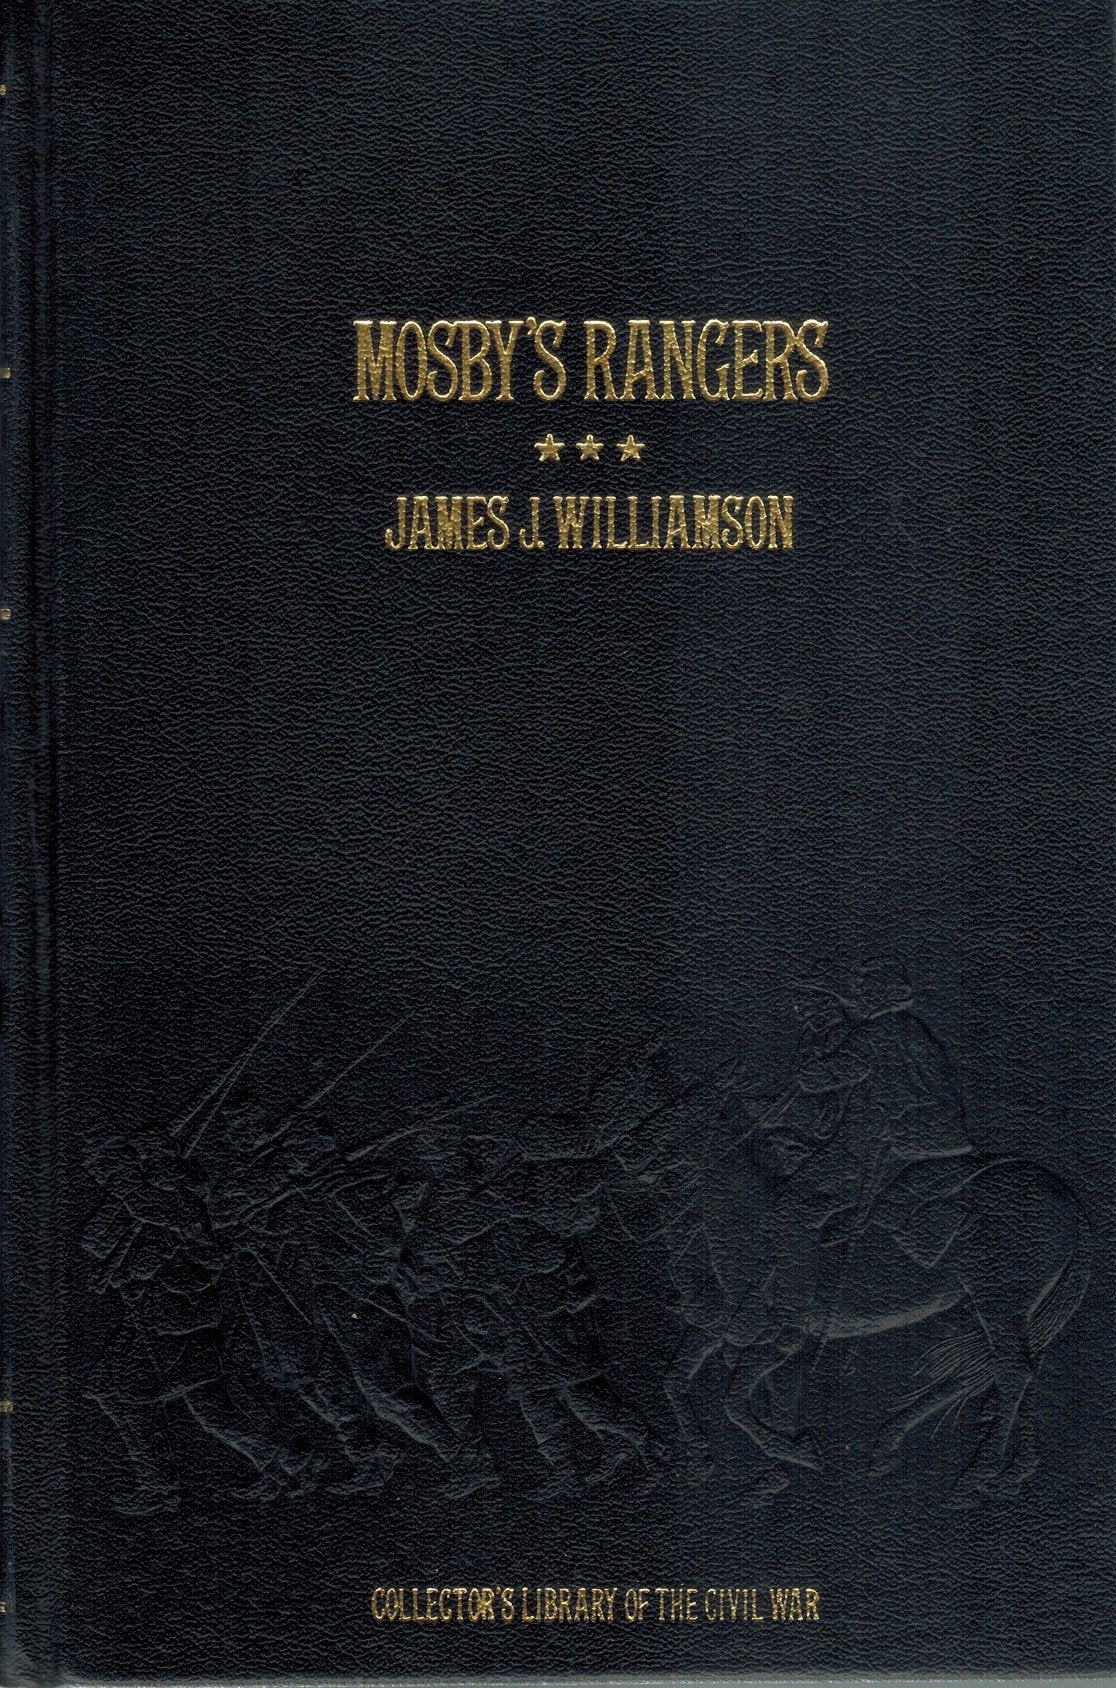 MOSBY'S RANGERS  by Williamson, James J. & Photographs